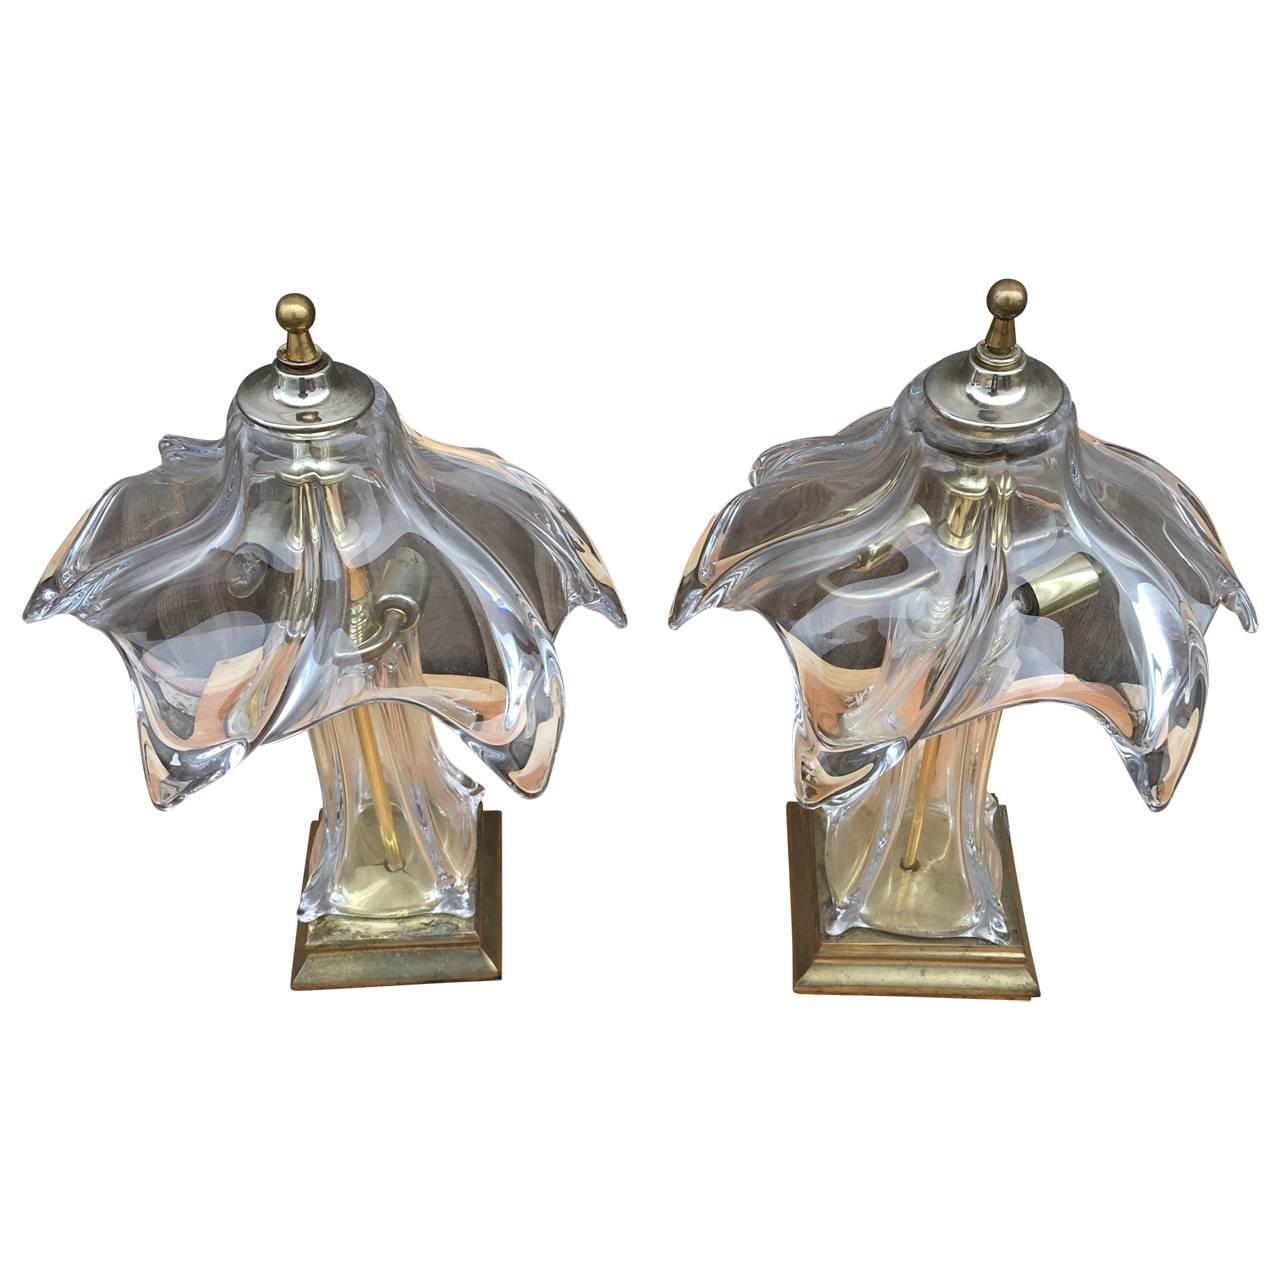 Mid-Century pair of Murano glass lamps.
This pair of lamps are graceful and quite unusual. The shades are handblown Murano glass in a beautiful curved design. The bases are a heavy and sturdy brass with a vintage patina. Lovely as nightstand lamp